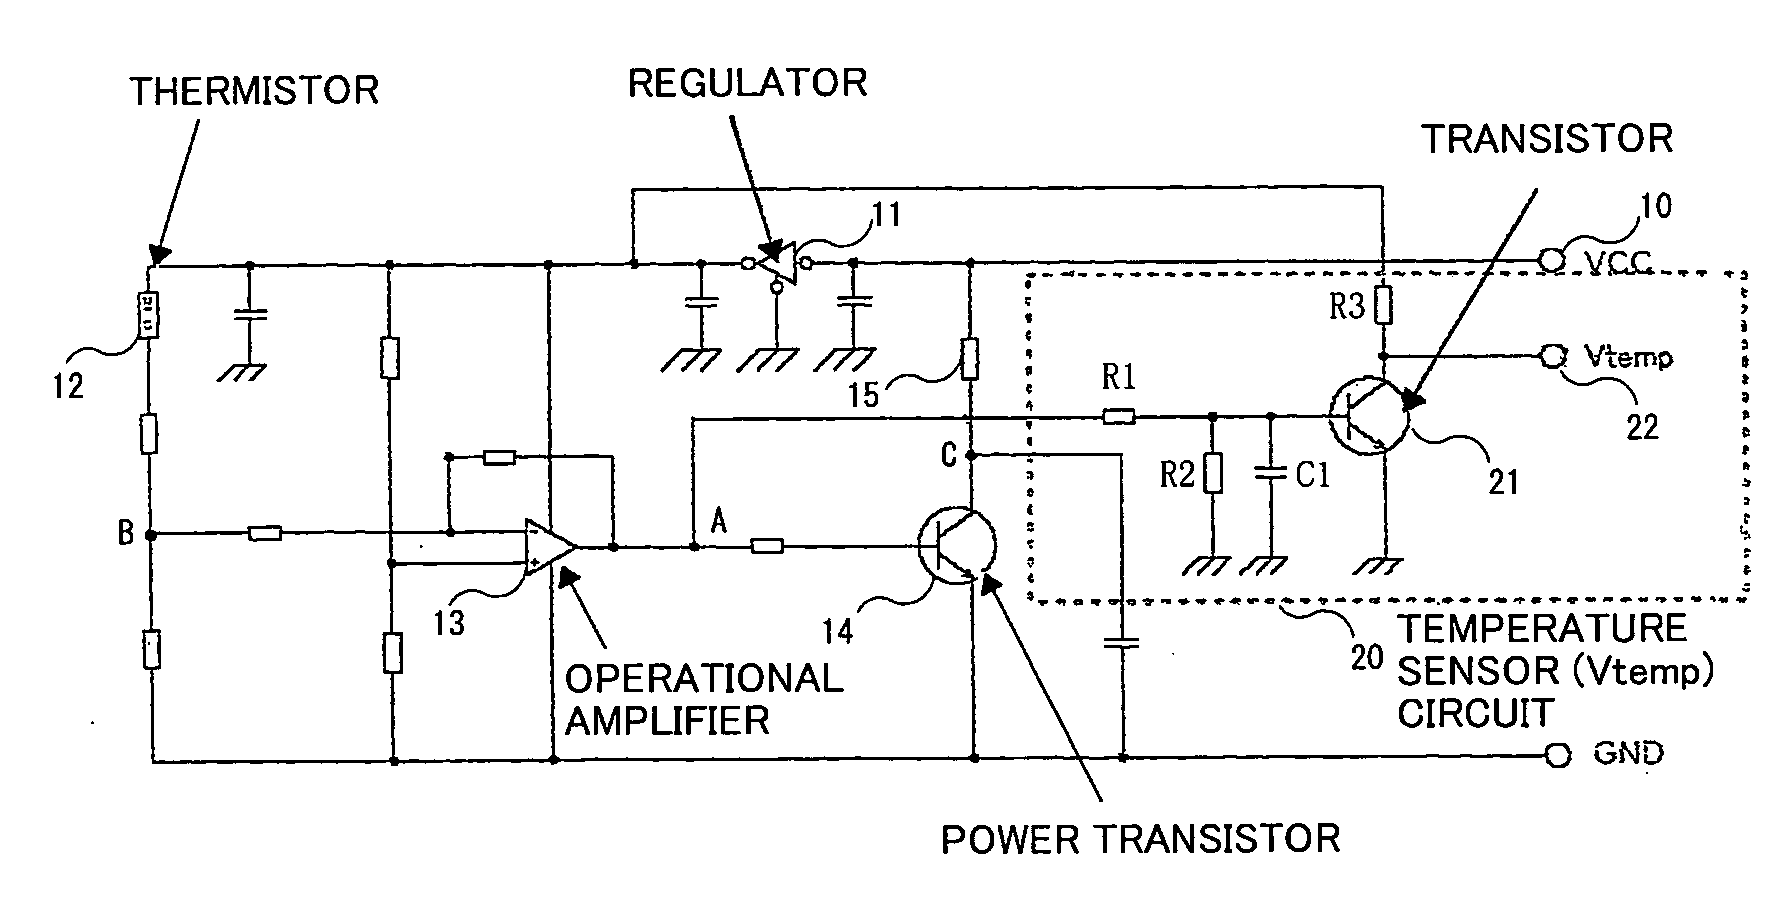 Control circuit for thermostatic oven in oven controlled crystal oscillator